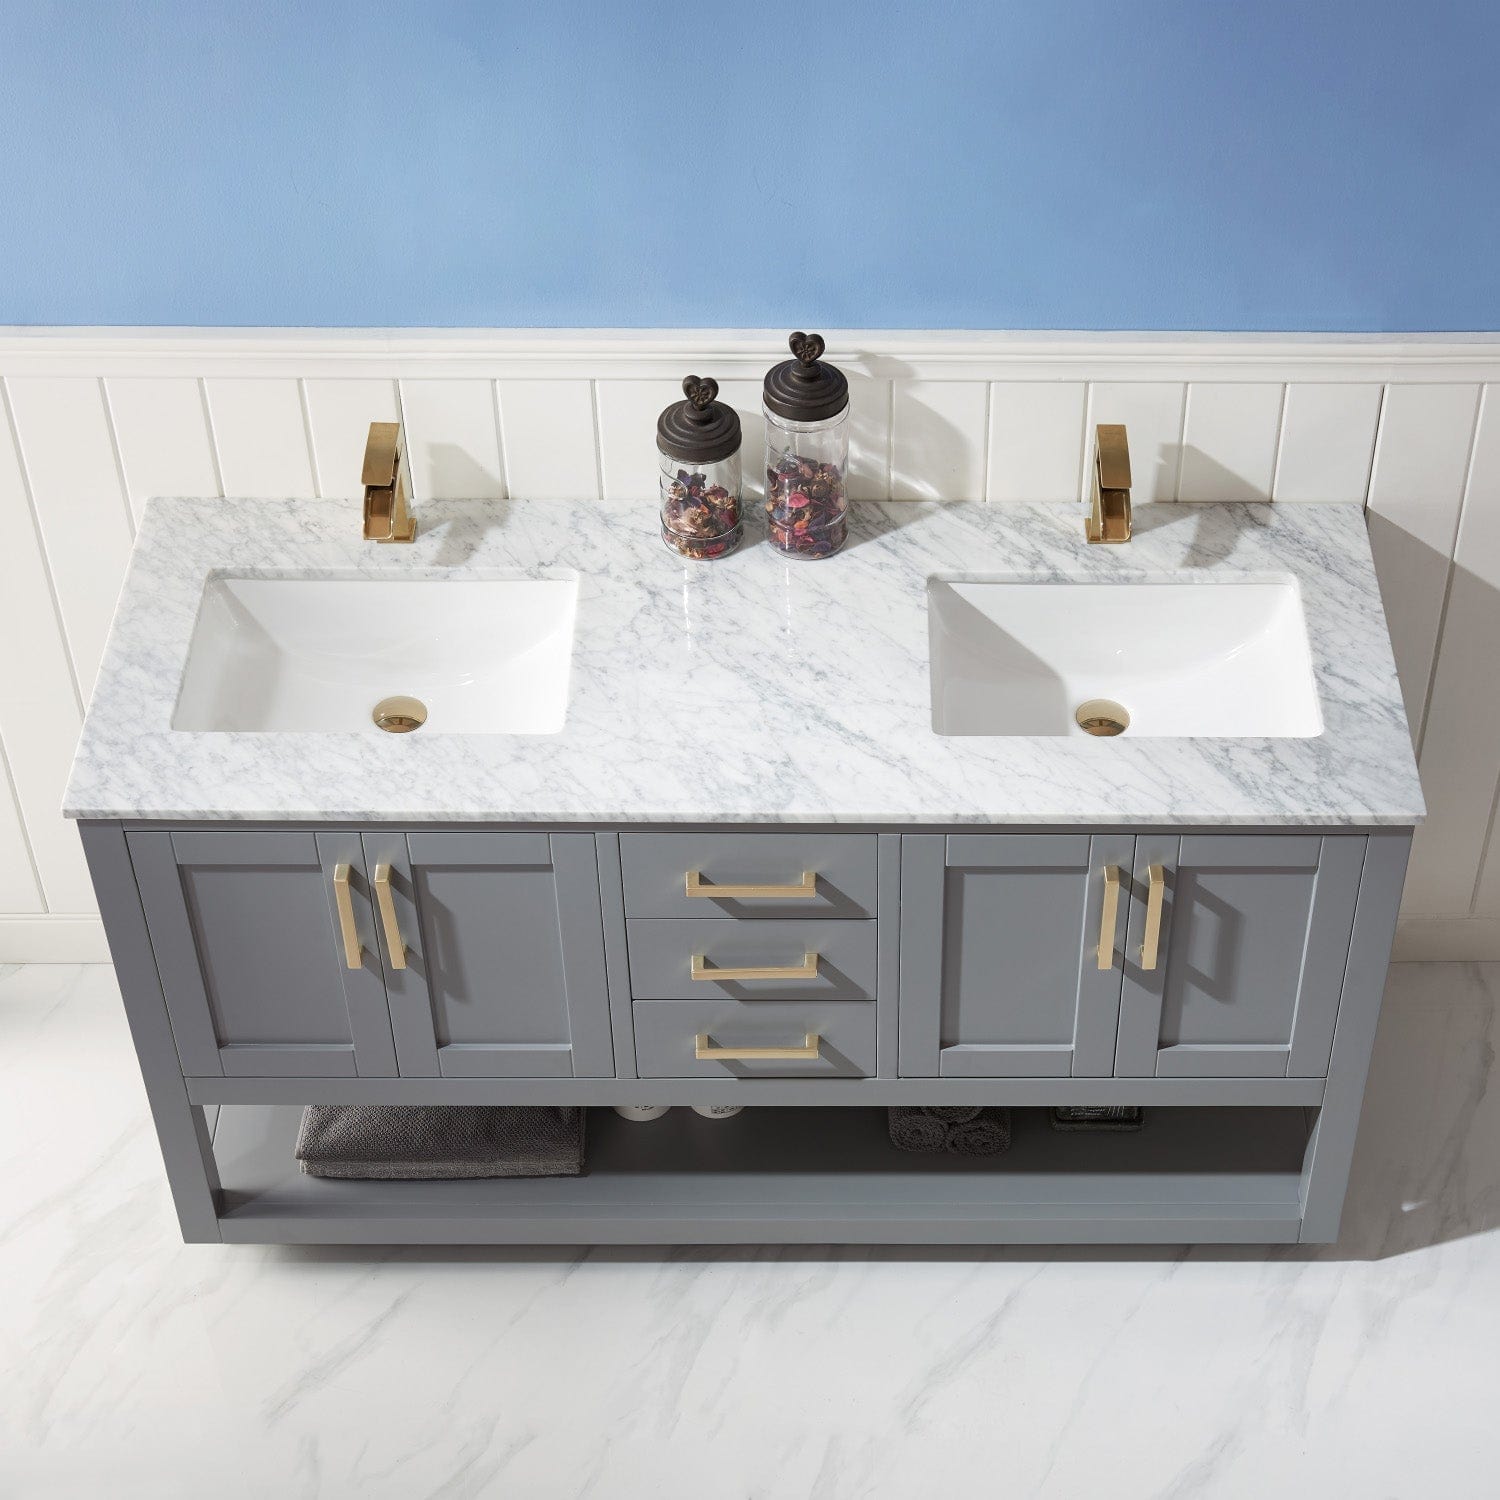 Altair Remi 60" Double Bathroom Vanity Set in Gray and Carrara White Marble Countertop without Mirror 532060-GR-CA-NM - Molaix631112971522Vanity532060-GR-CA-NM